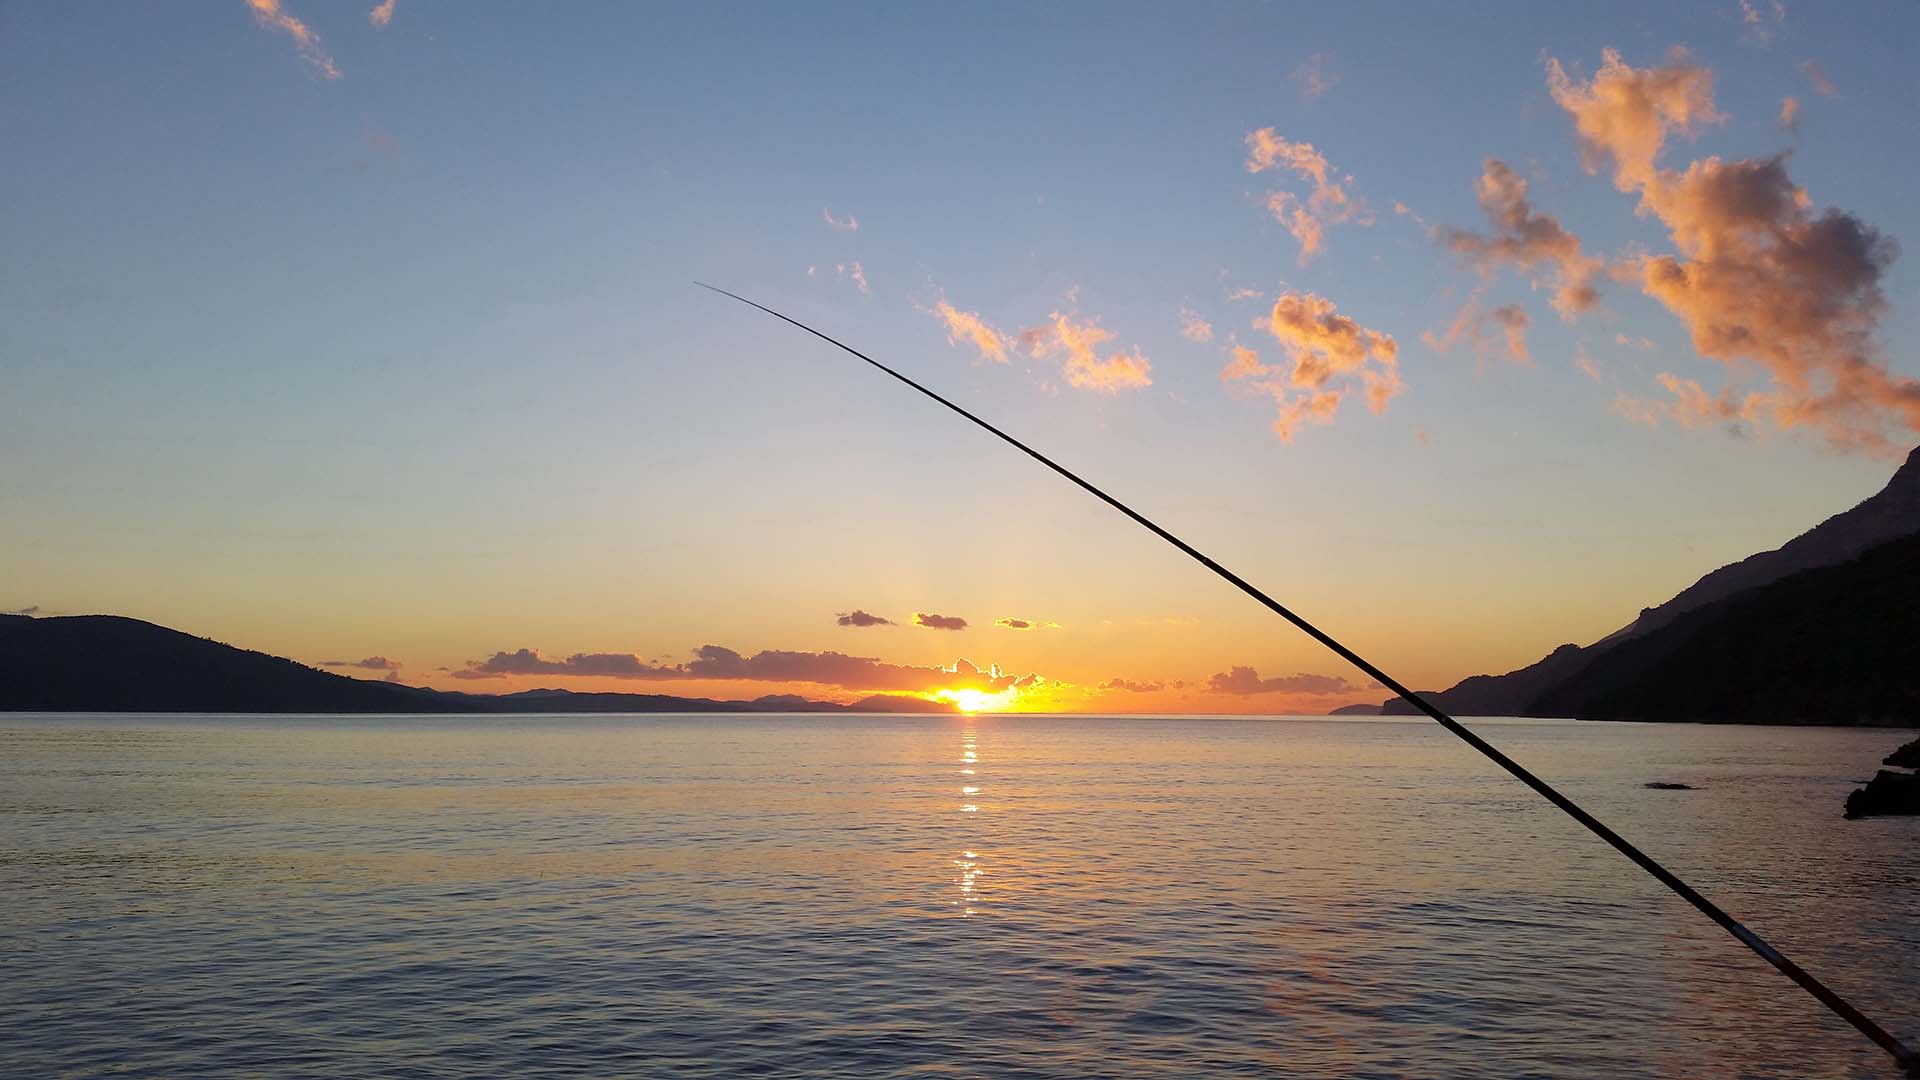 A fishing rod near water during sunset